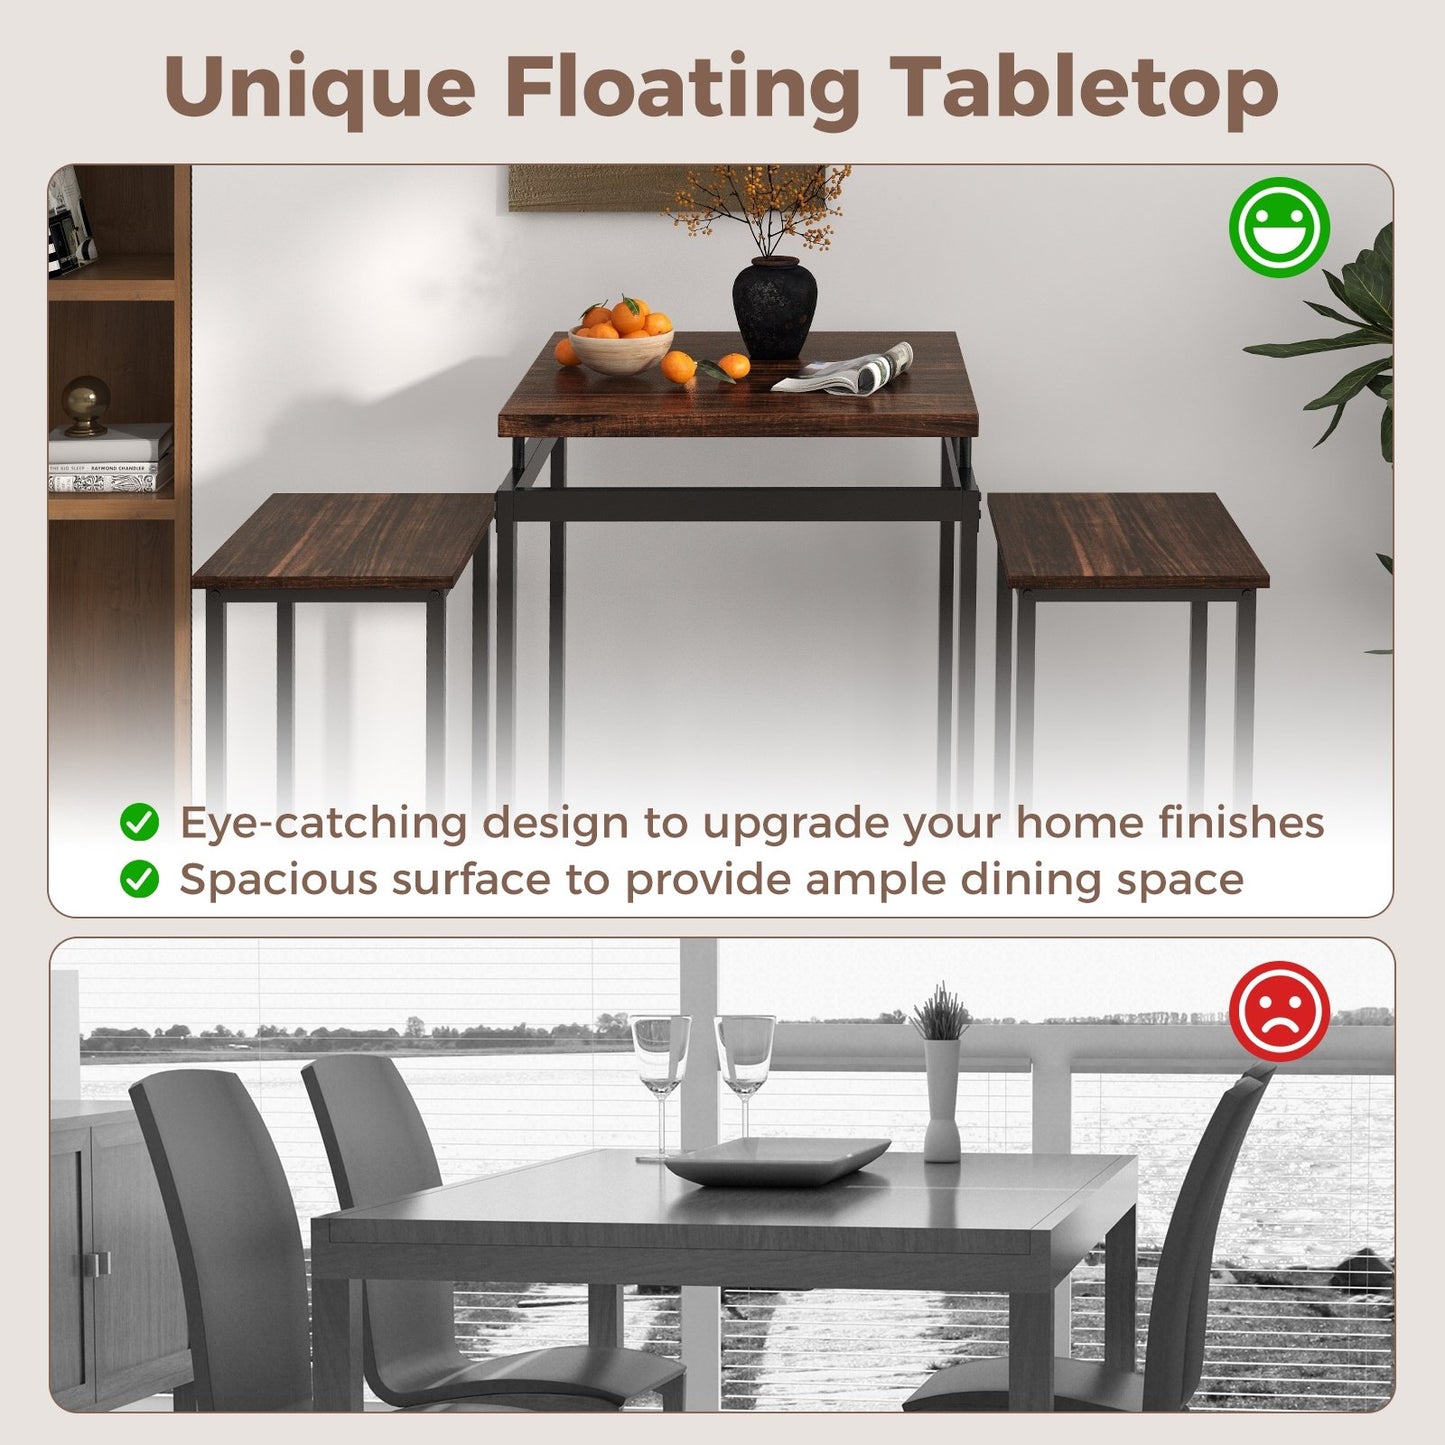 3 Pieces Pub Dining Table Set with Floating Tabletop and Footrest, Rustic Brown